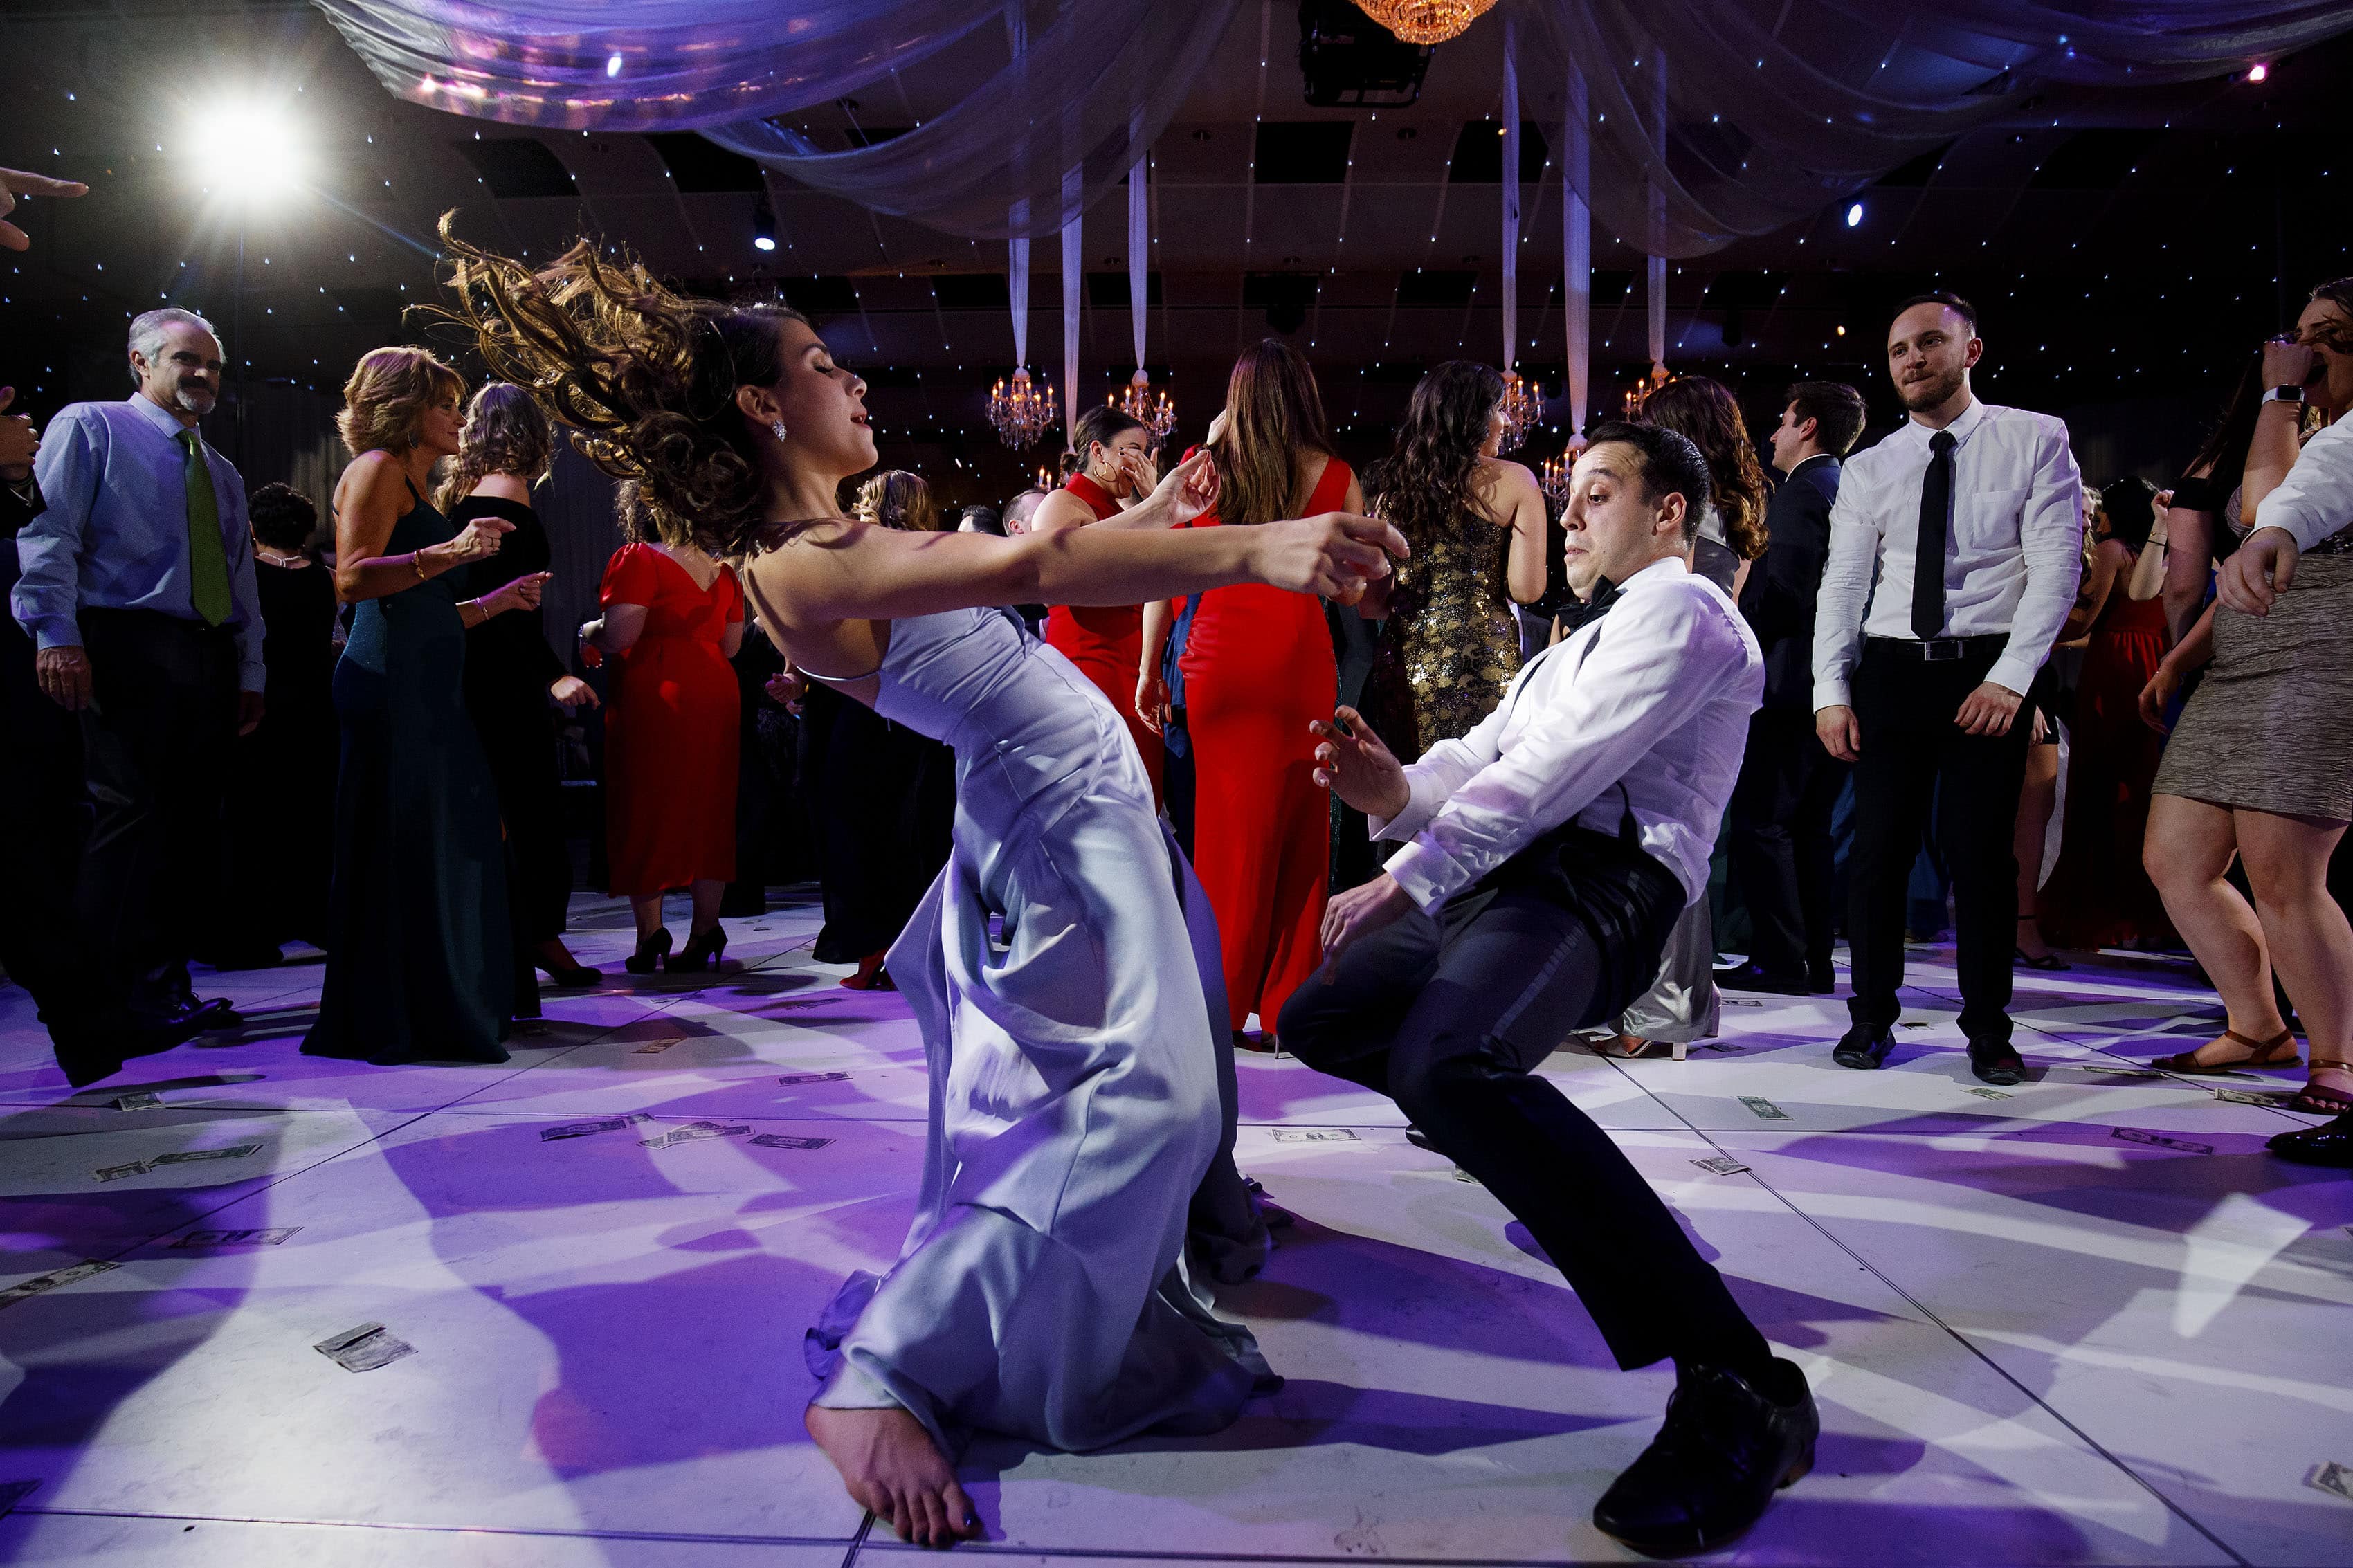 Guests dance during a wedding recetion at Seawell Ballroom